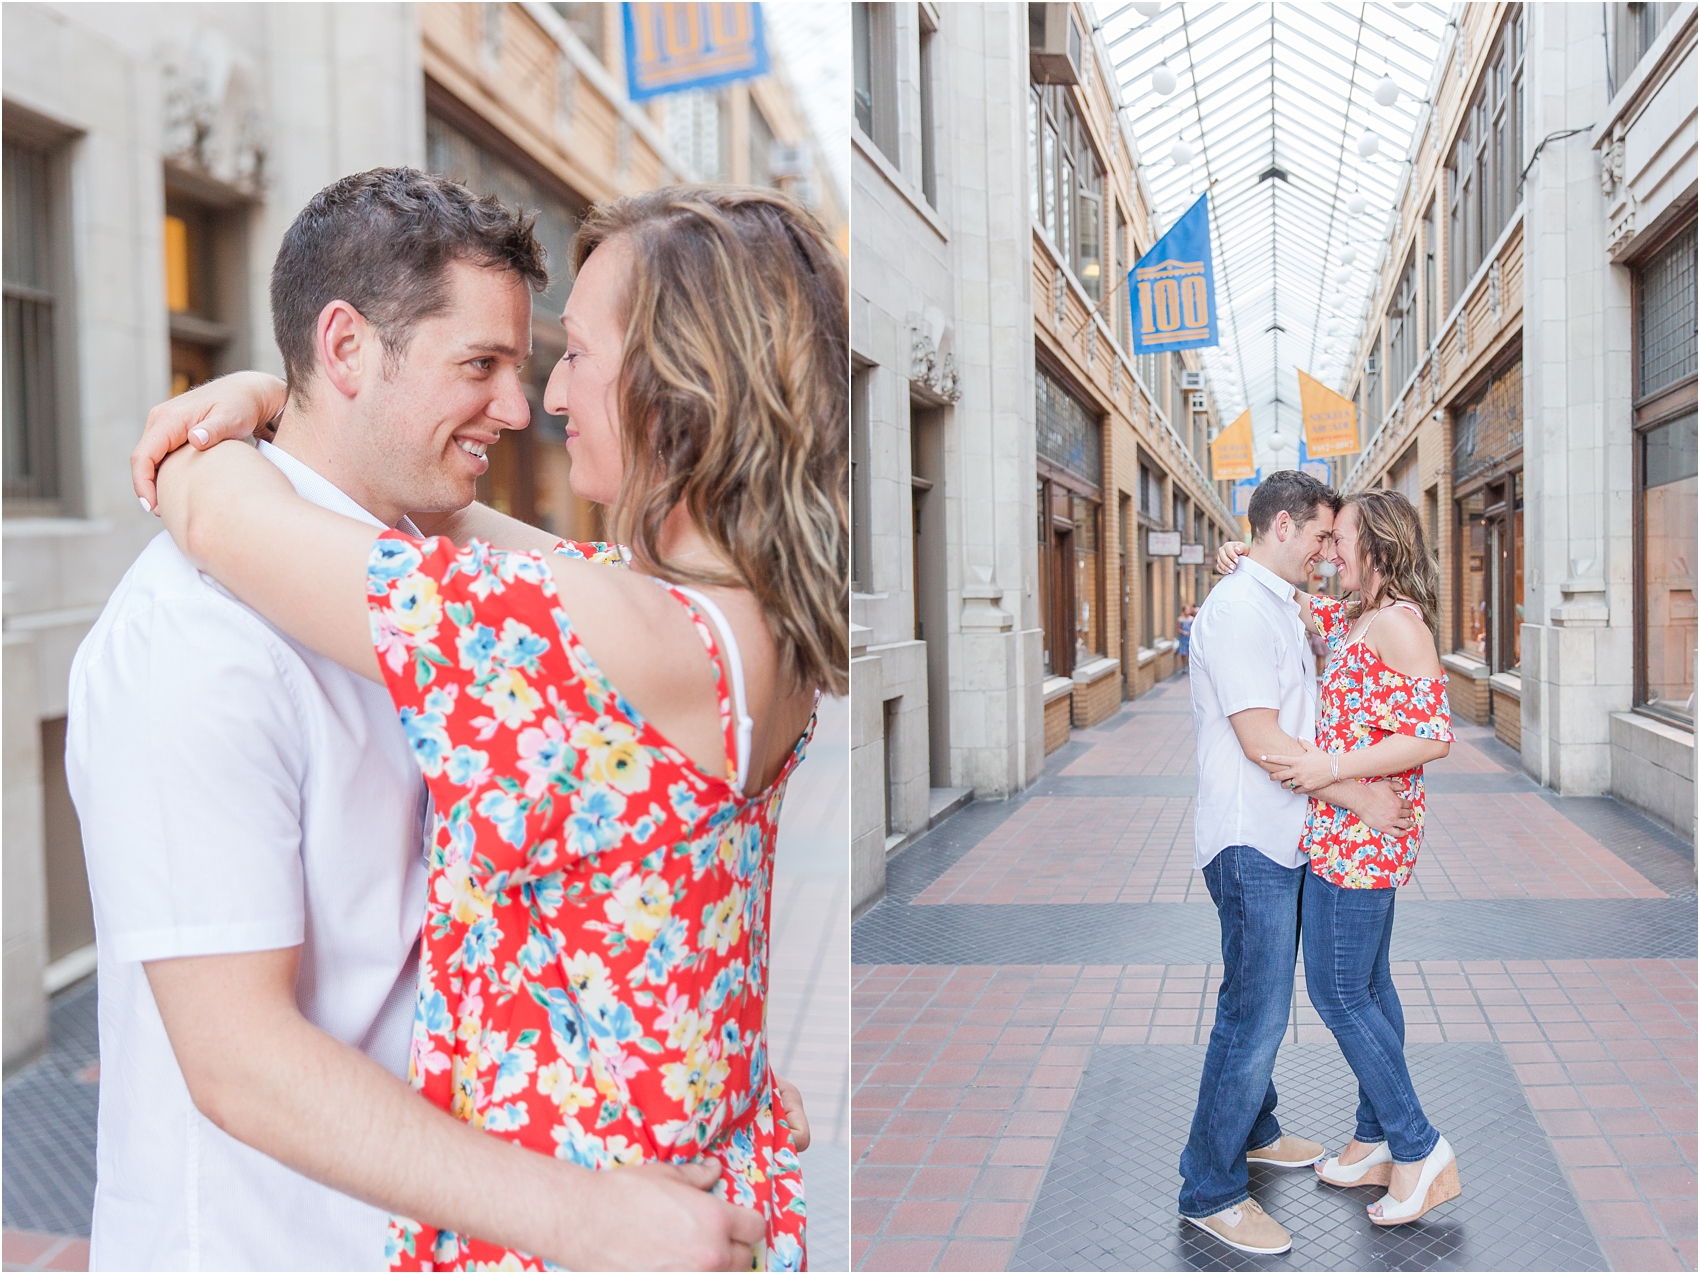 fun-adventurous-engagement-photos-at-the-nickels-arcade-in-ann-arbor-mi-by-courtney-carolyn-photography_0027.jpg